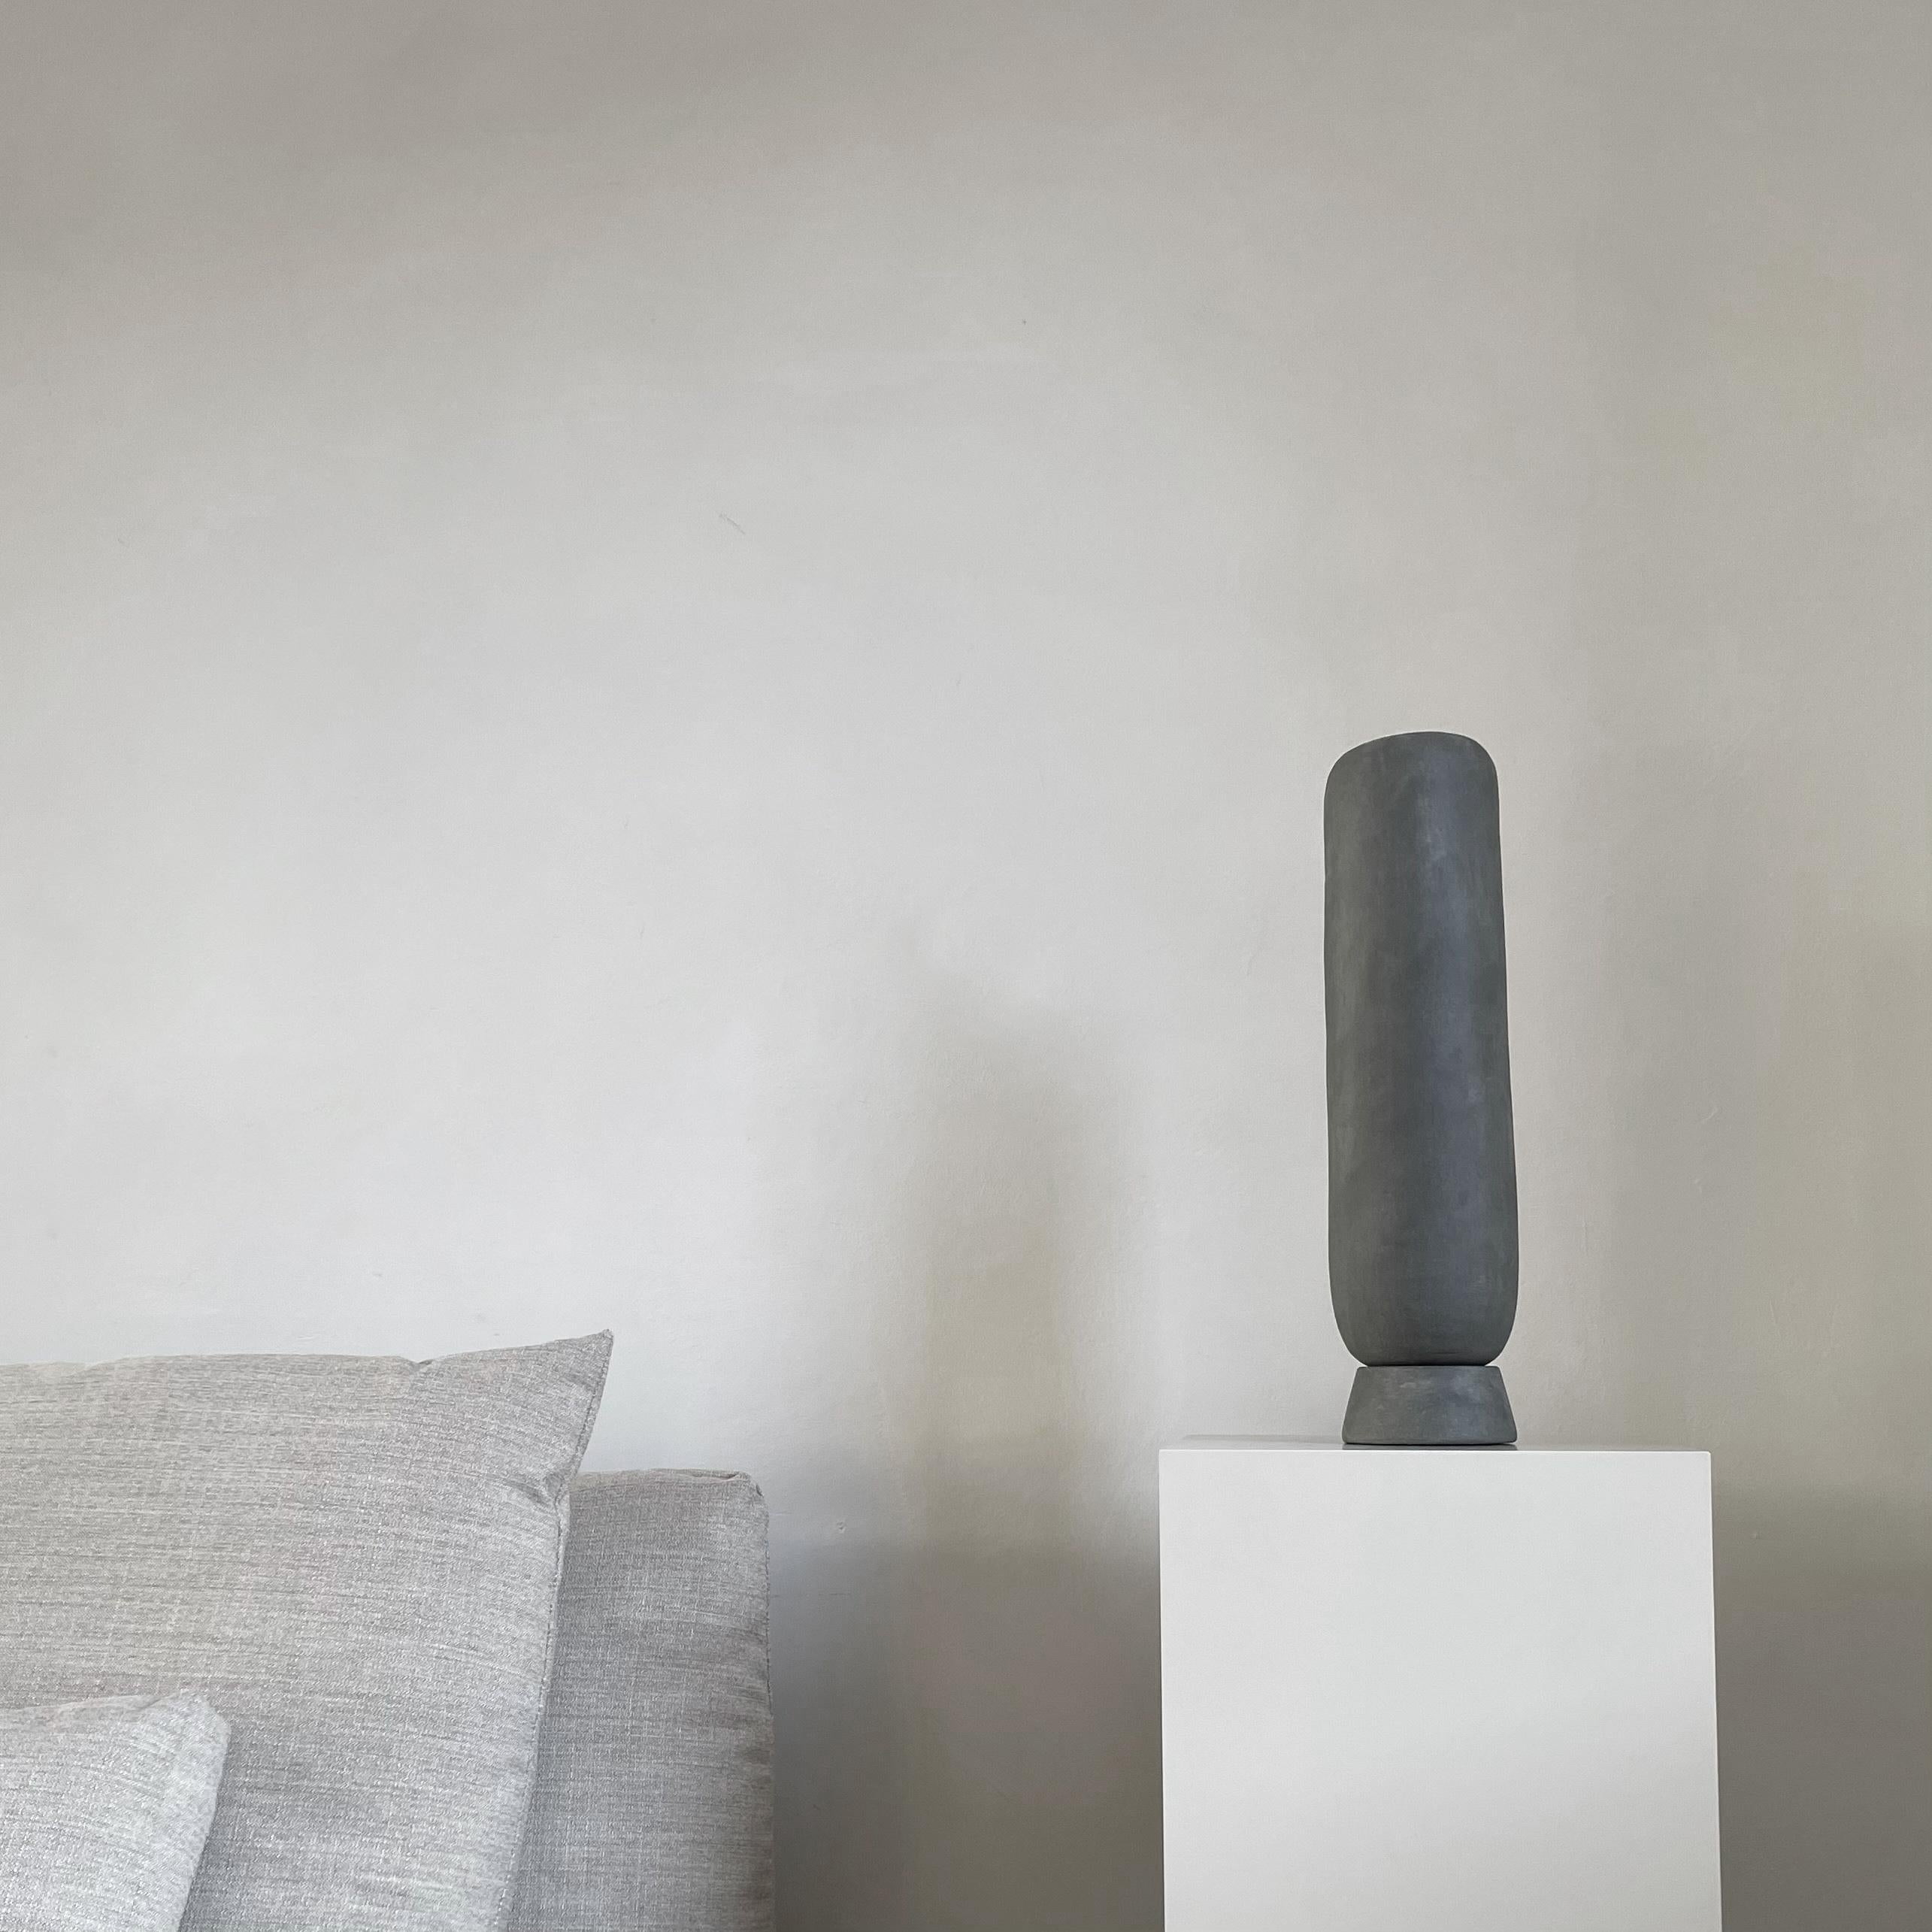 A Set of 4 Dark Grey Kabin Vase Tall by 101 Copenhagen
Designed by Kristian Sofus Hansen & Tommy Hyldahl
Dimensions: L10 / W10 / H45 CM
Materials: Ceramic

Kabin is a collection of handmade ceramic vases that is inspired from Japanese